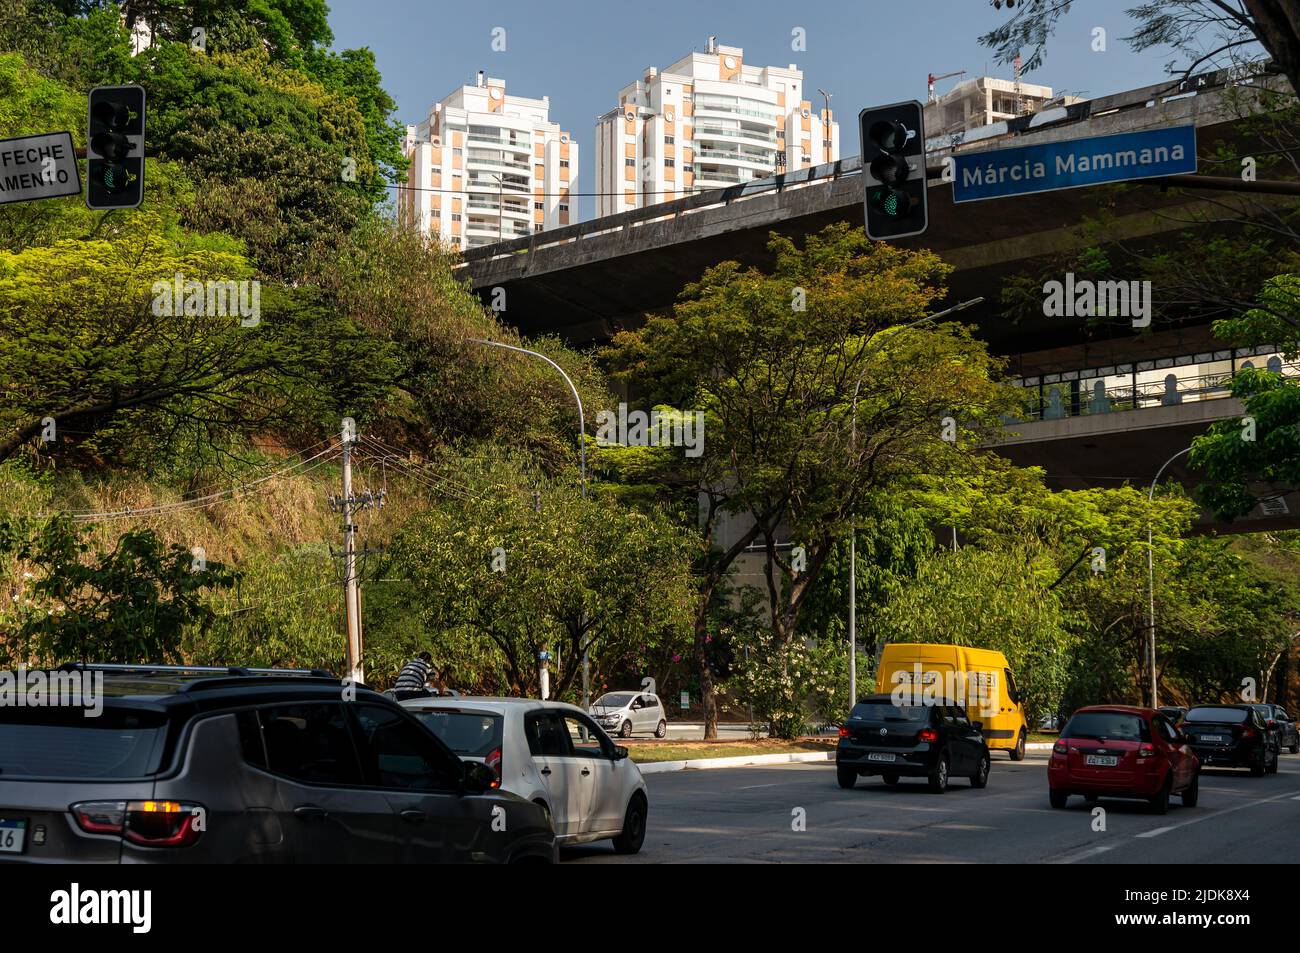 Big trees full of green foliage on the median strip of Paulo VI avenue, right at Capitao Adalberto Mendes viaduct and Sumare Metro station. Stock Photo